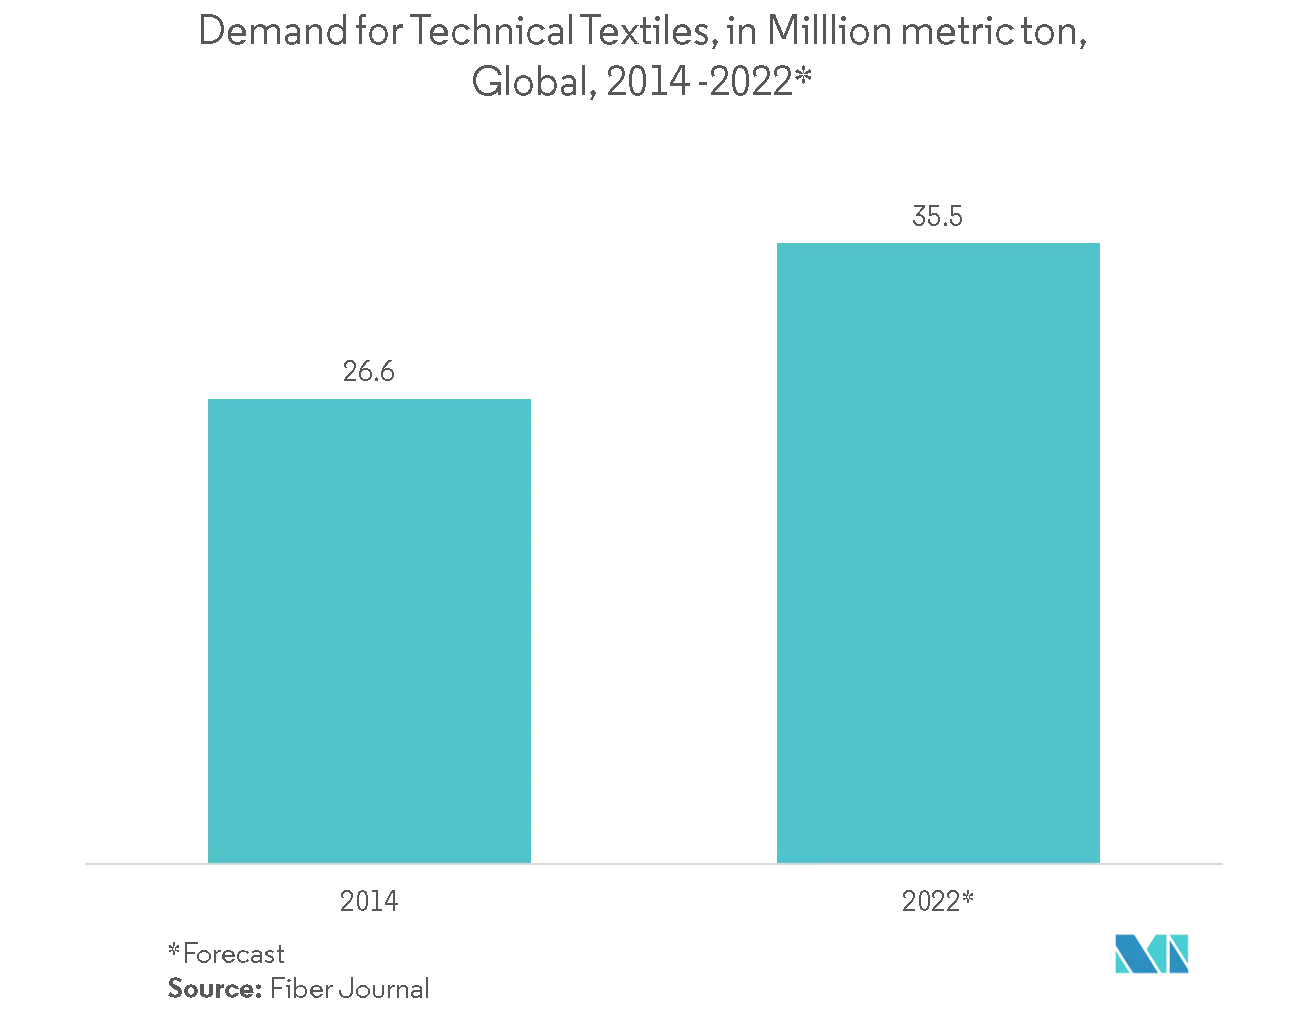 Wearable Computing Devices Market: Demand for Technical Textiles, in Million, metric ton, Global, 2014 - 2022